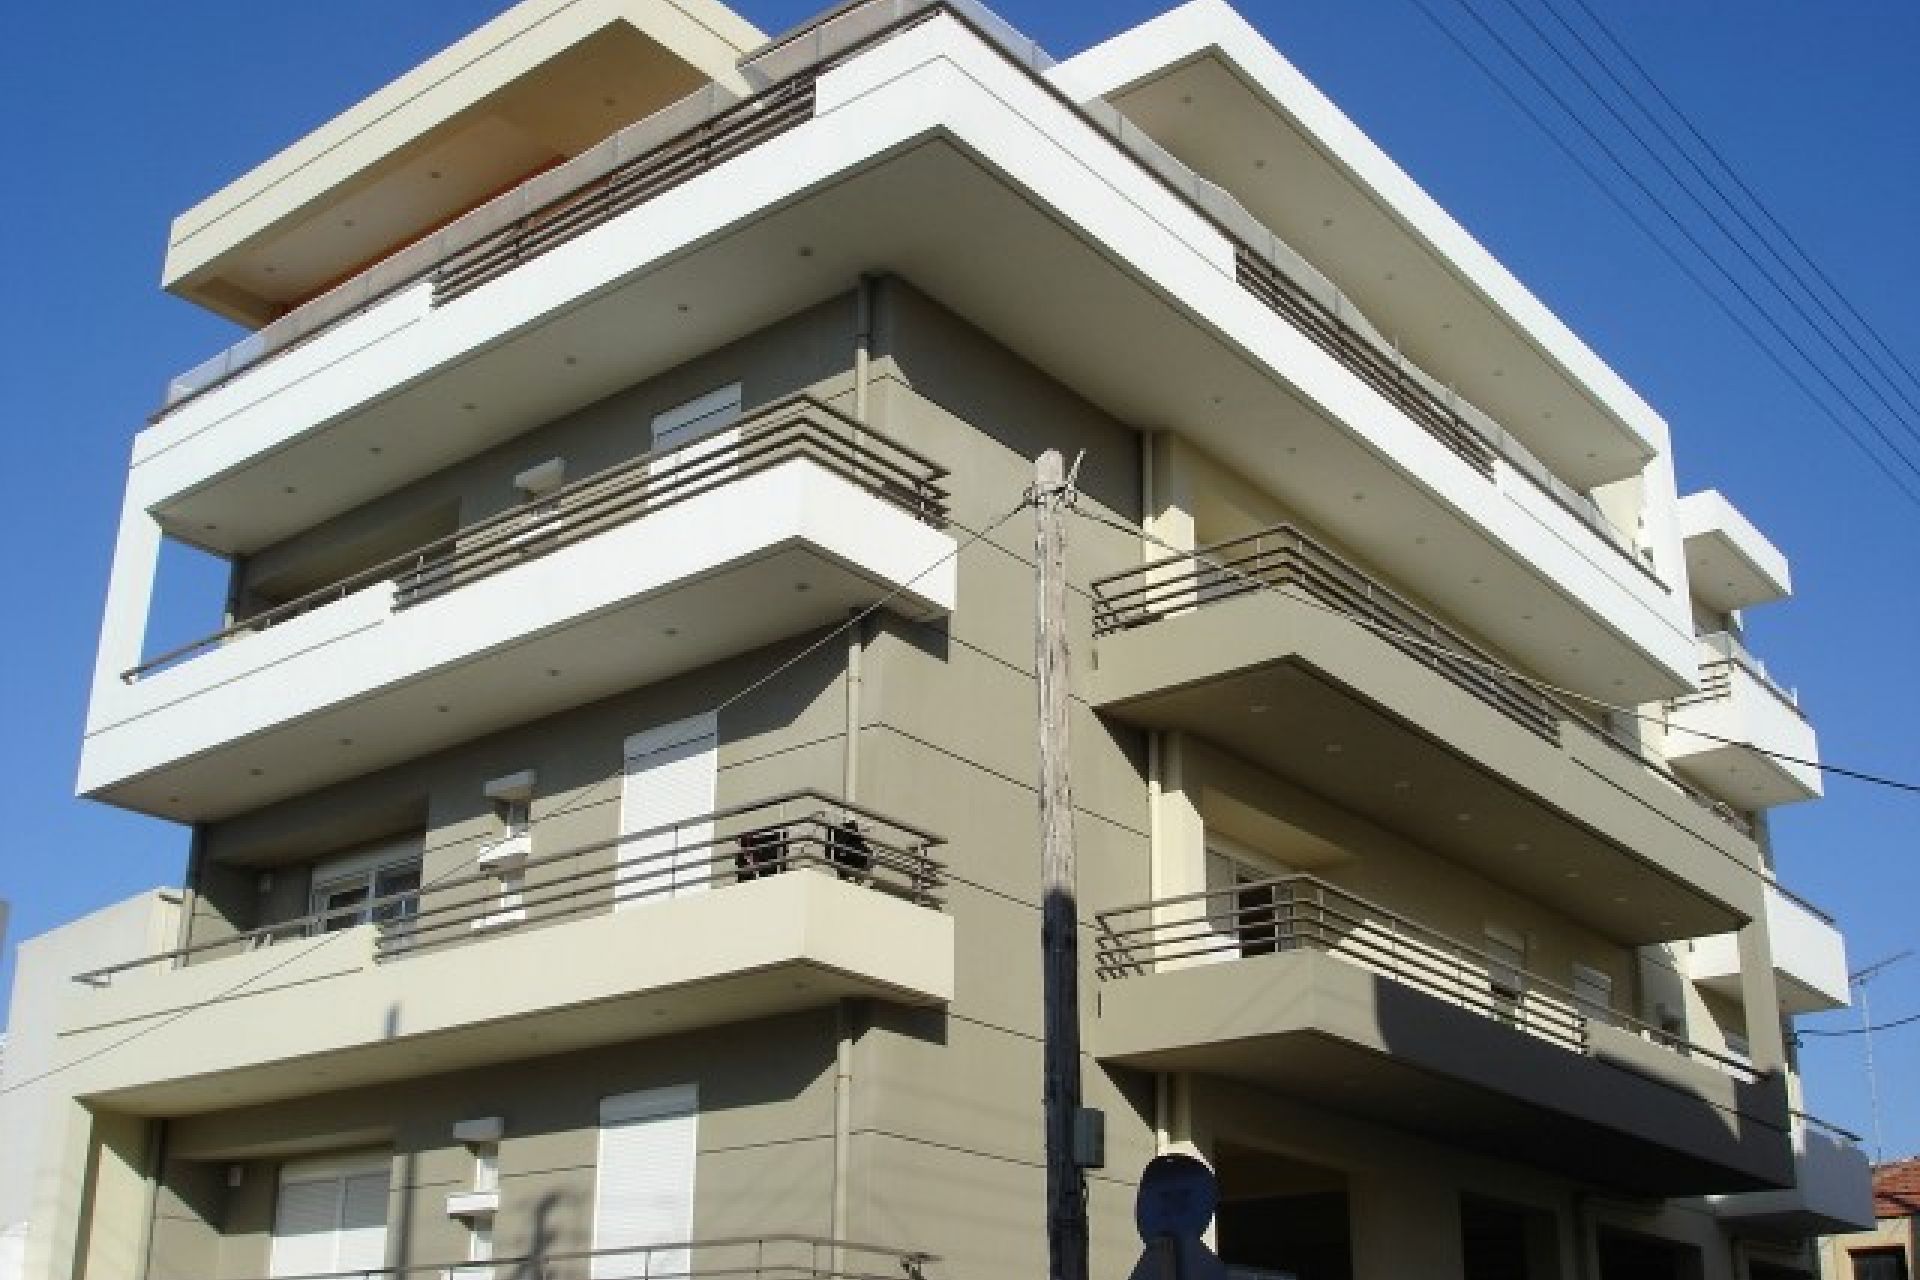 Four-storey residential complex with pilotis section & basement